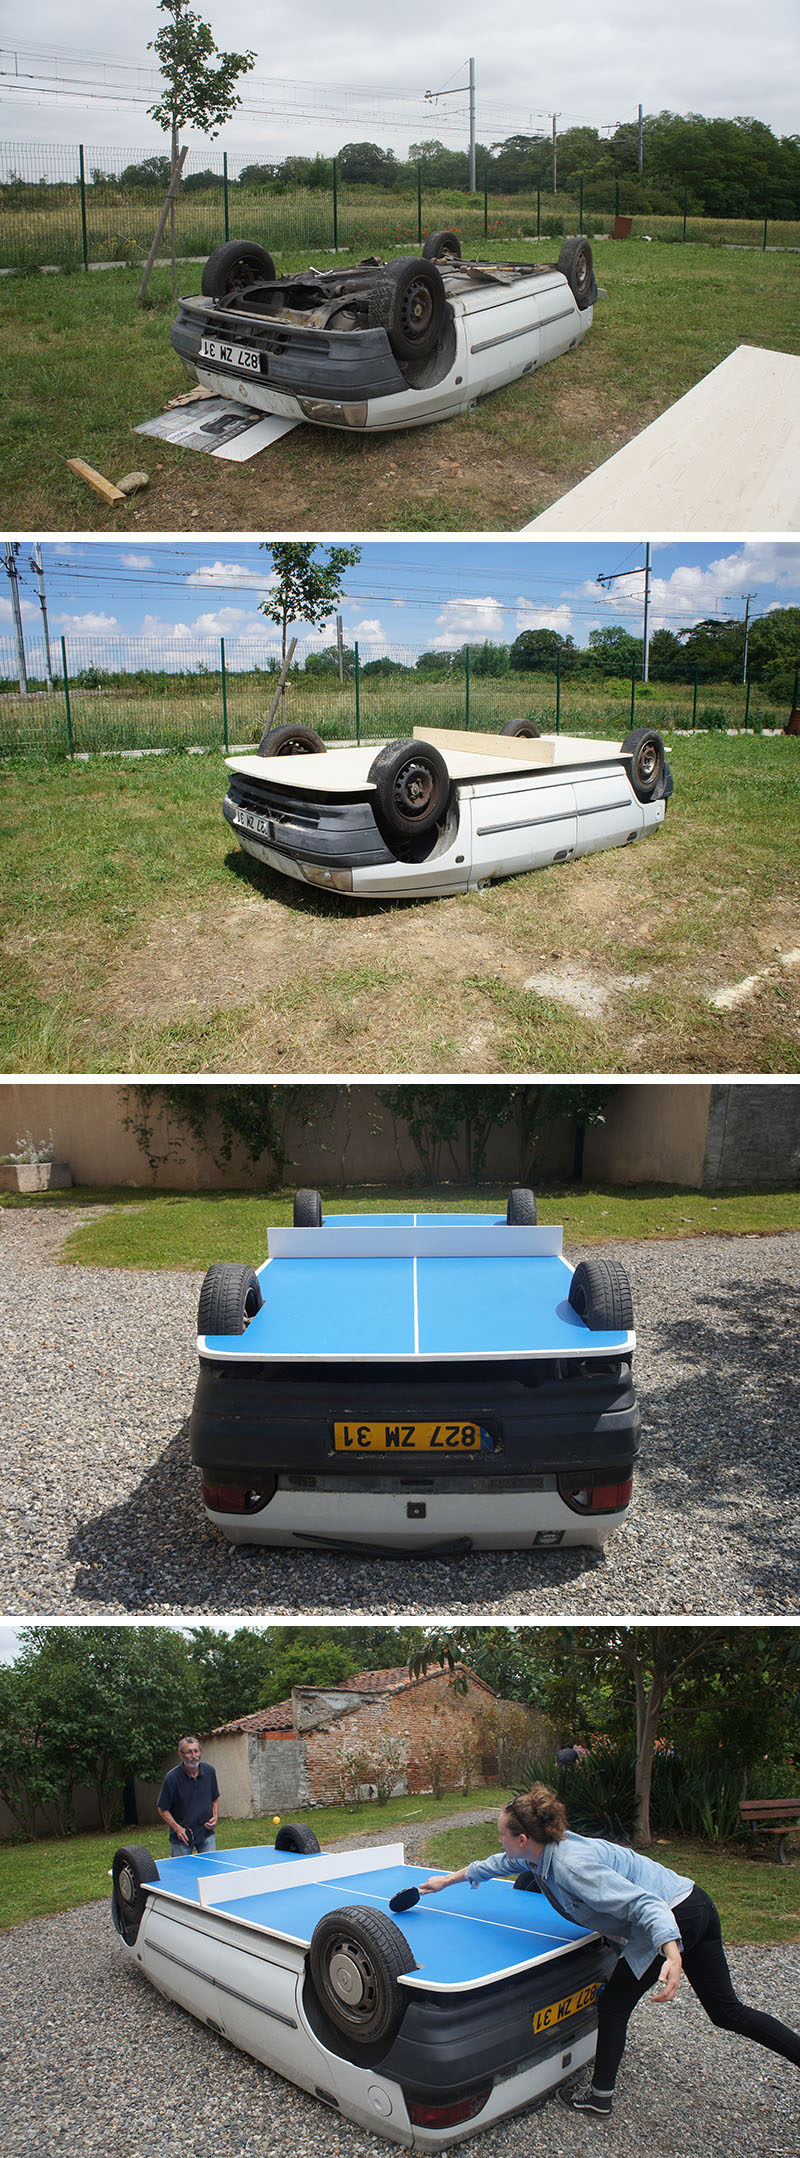 Old Cars Aren't Just Good For Scrap Metal...They Also Make Great Outdoor Ping Pong Tables